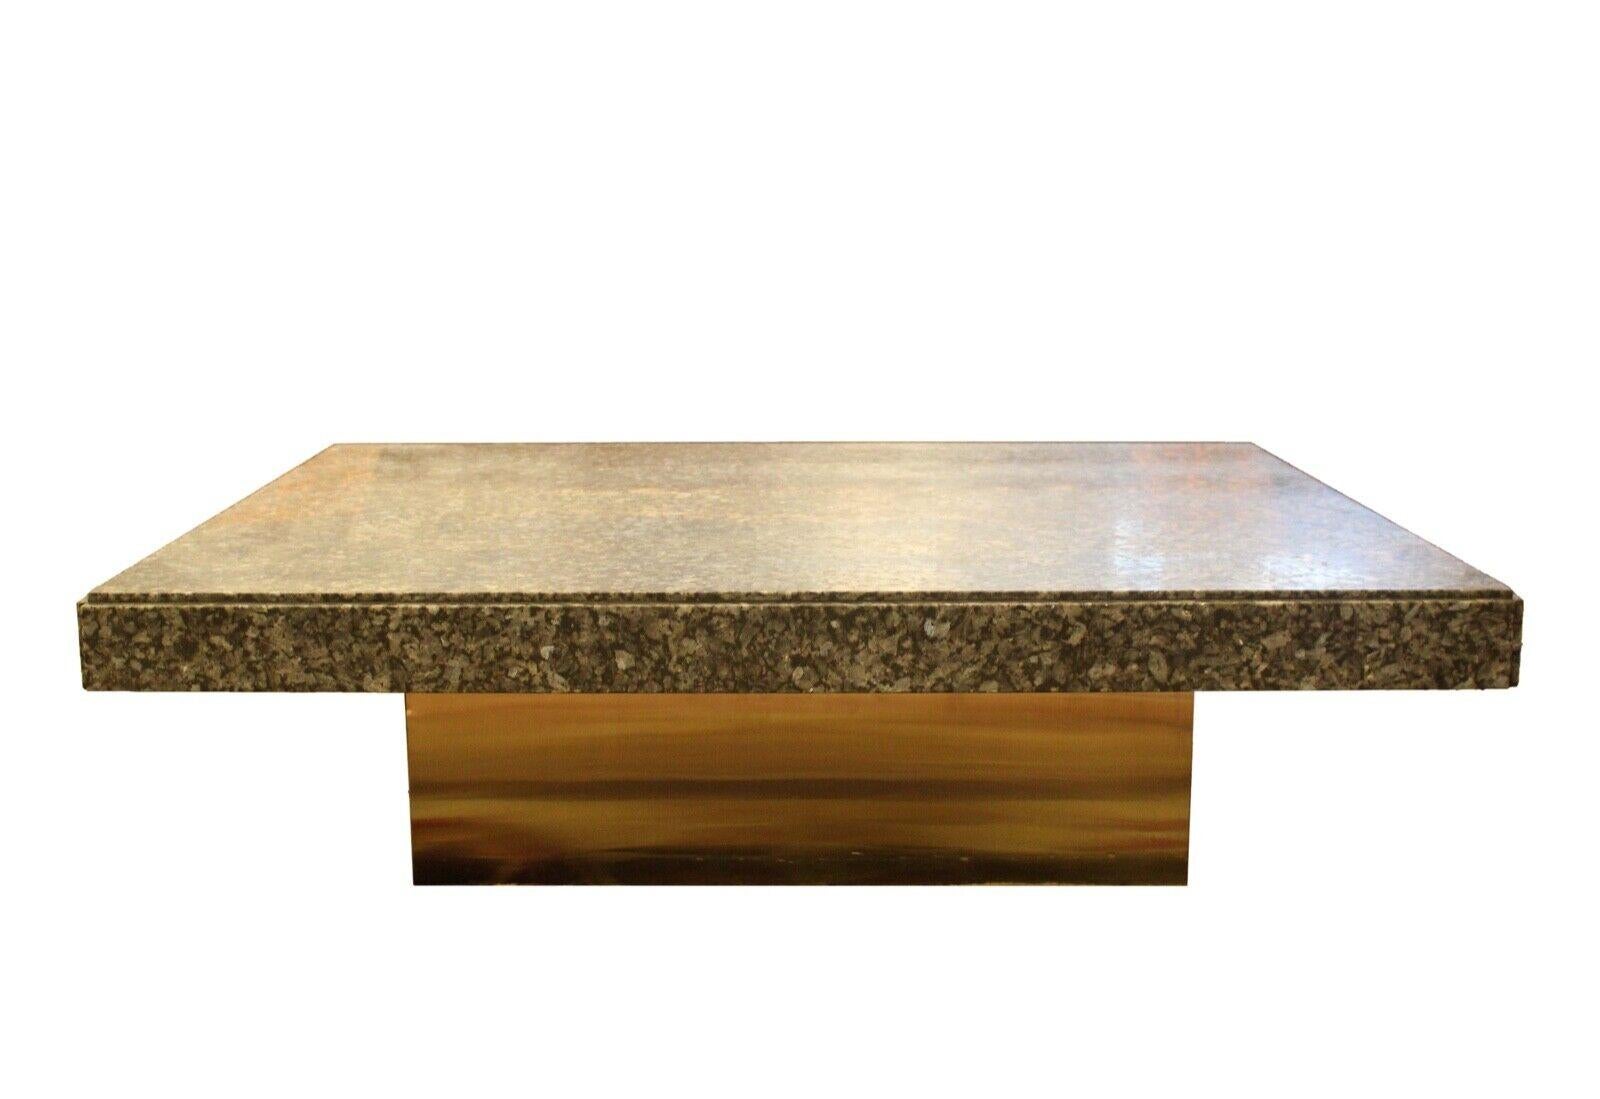 Le Shoppe Too presents this magnificent table by the famous architect Irv Tobocman. Made of honed granite floating on a brushed brass square base. In excellent condition. Dimensions: 53.25